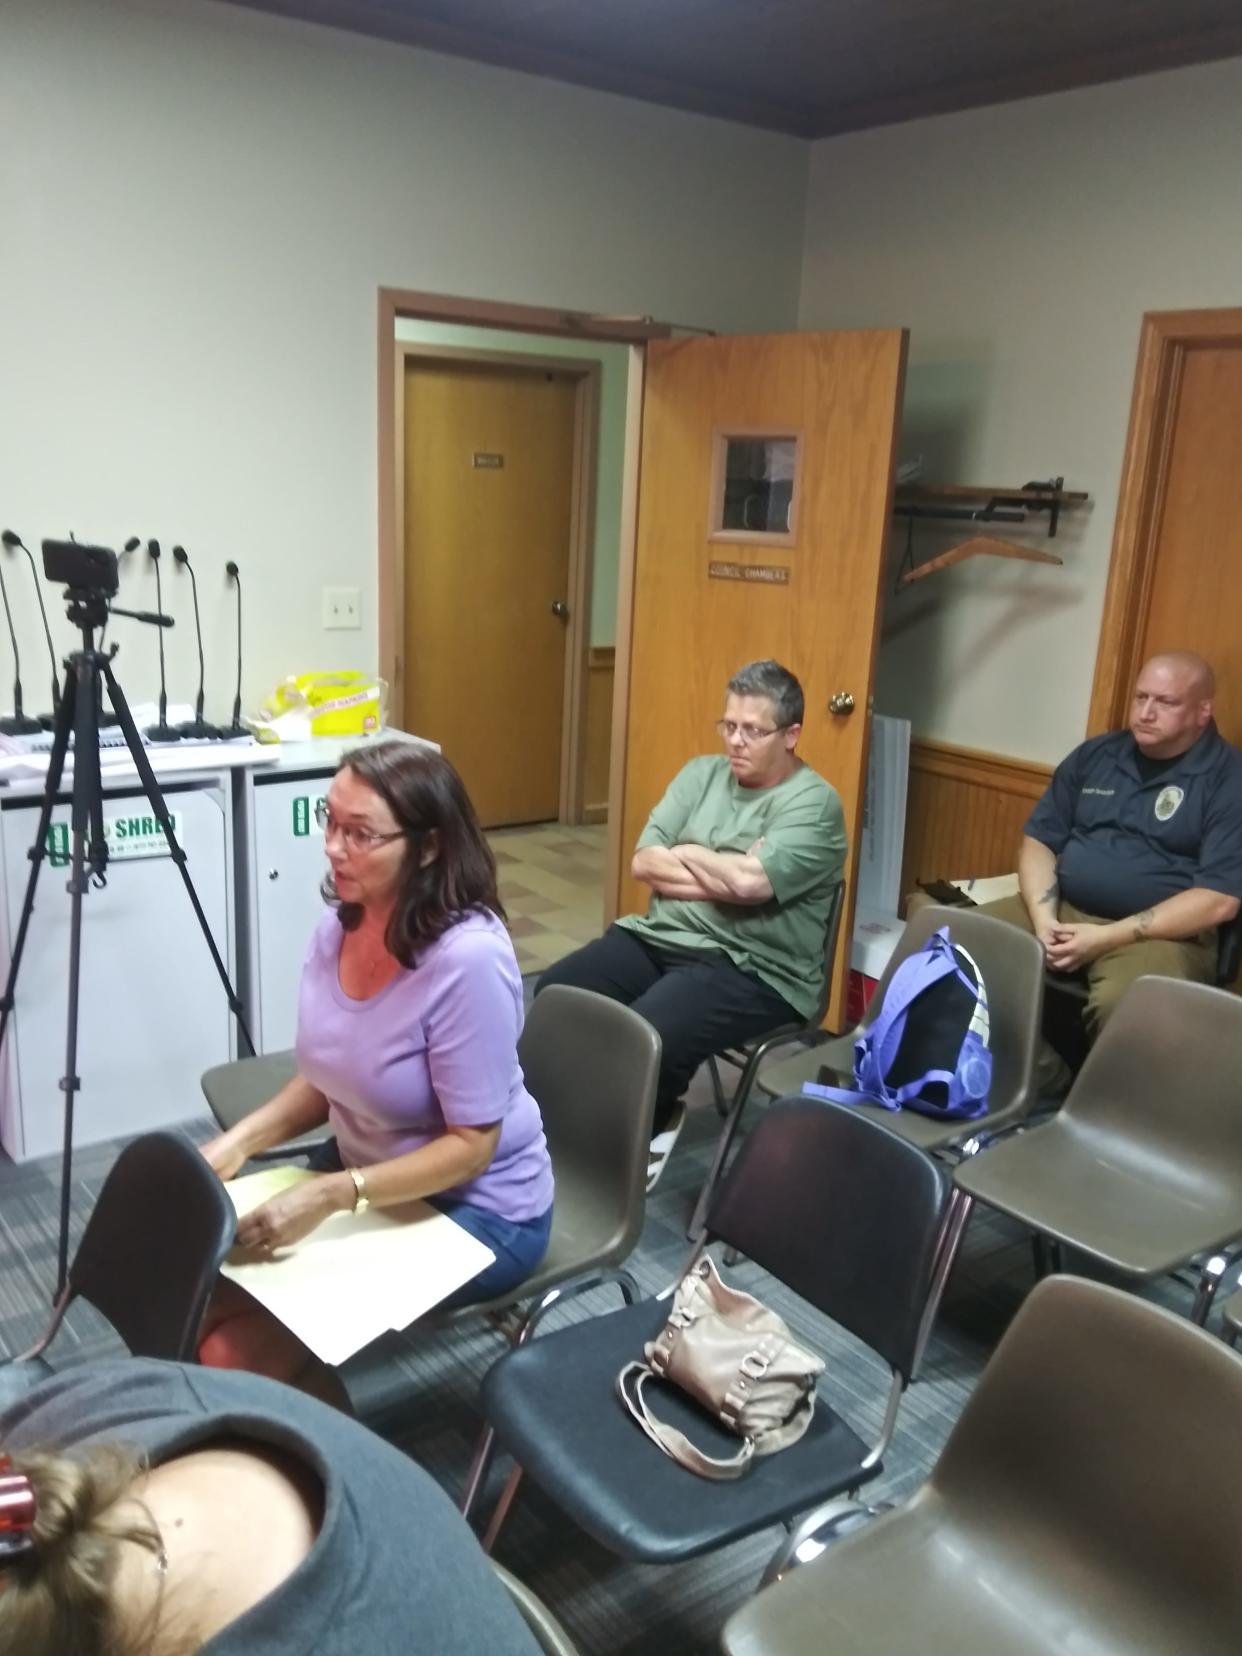 Millersburg resident Andrea Kellogg (left) addressed council as Tracy Byland and Millersburg Police Chief Matt Shaner look on. Kellogg expressed her concern about the safety of the village.